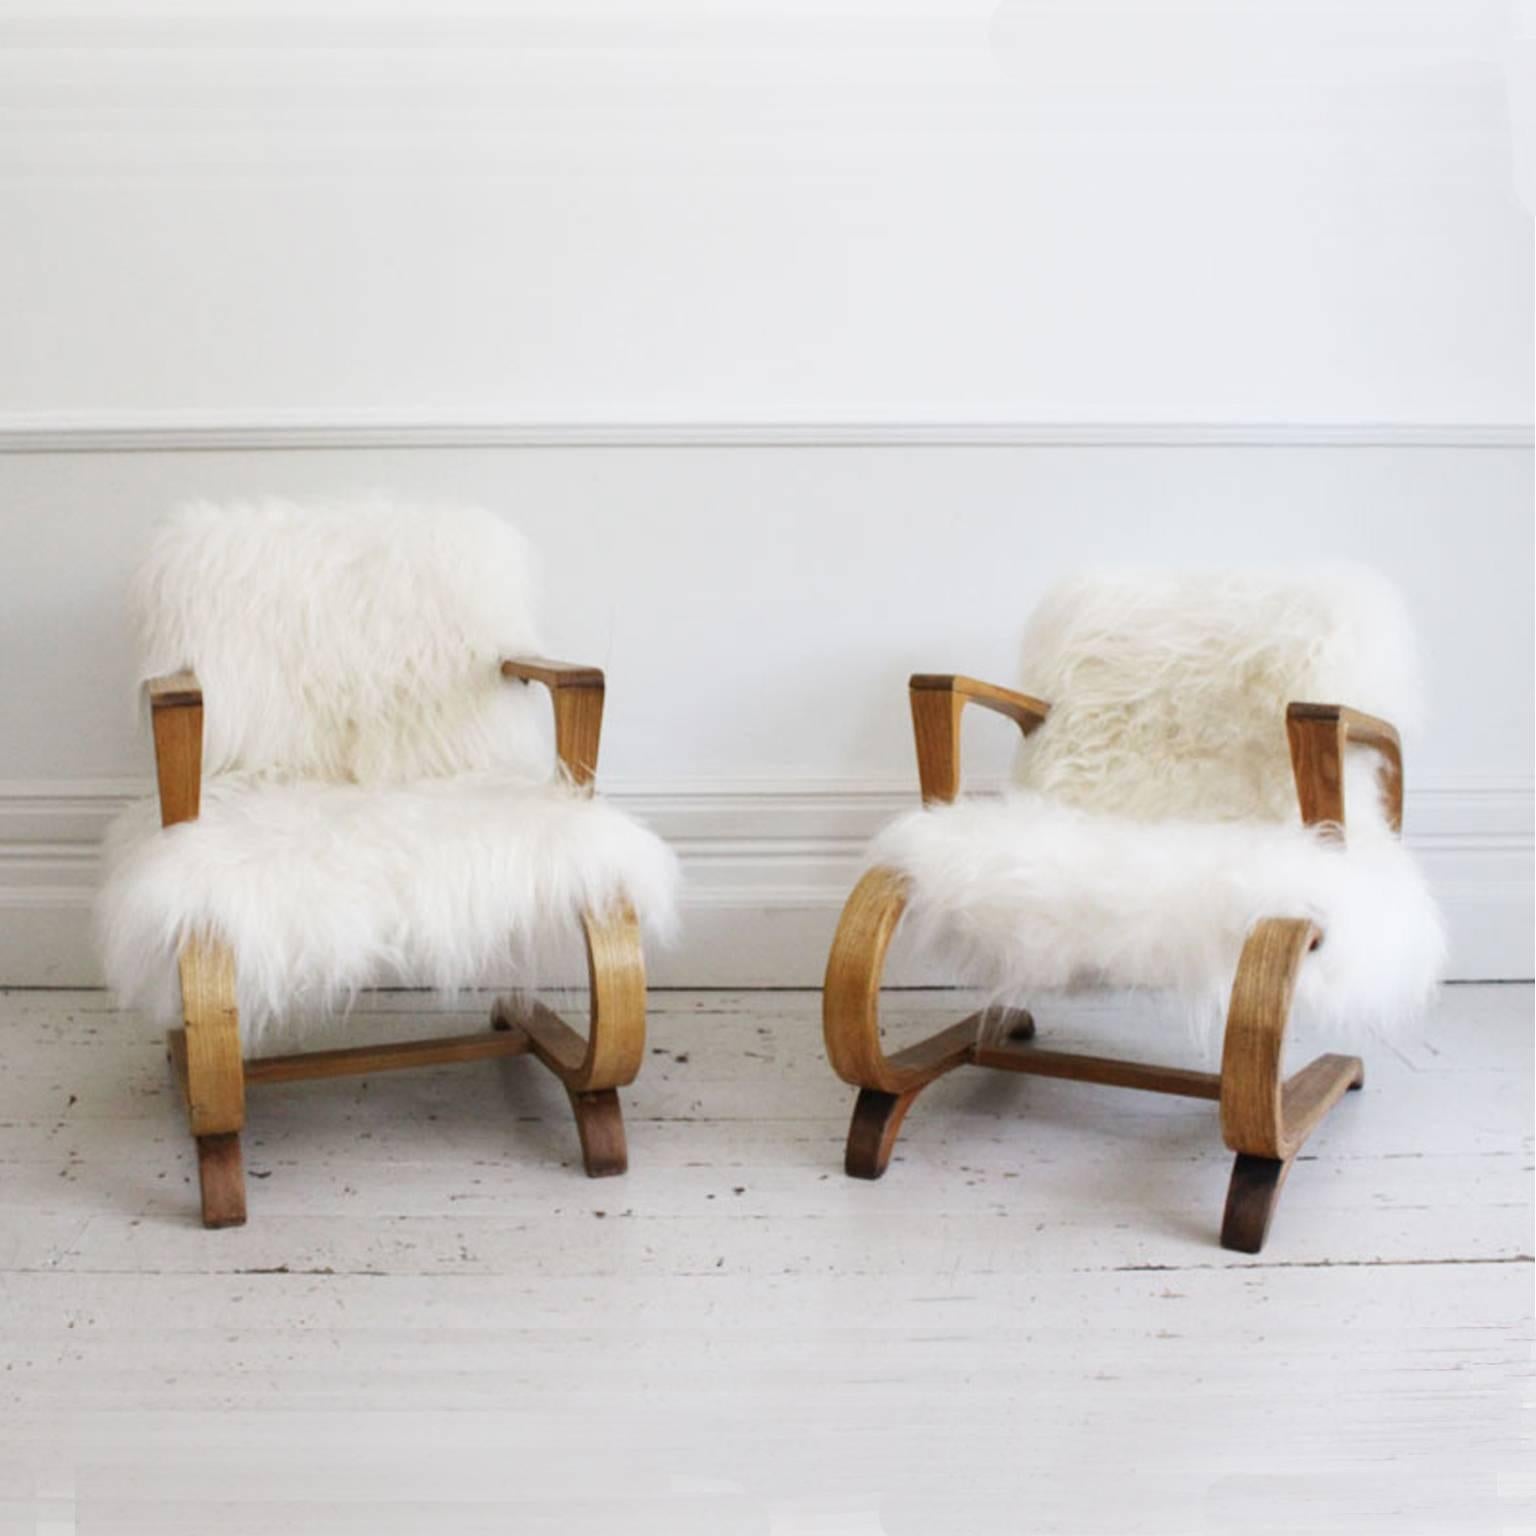 A pair of very stylish and incredibly unusual ash cantilever chairs in the style of Audoux-Minet. We have had them recovered with Icelandic Sheepskin and absolutely love the results. These chairs are very chic and would look fabulous pretty much